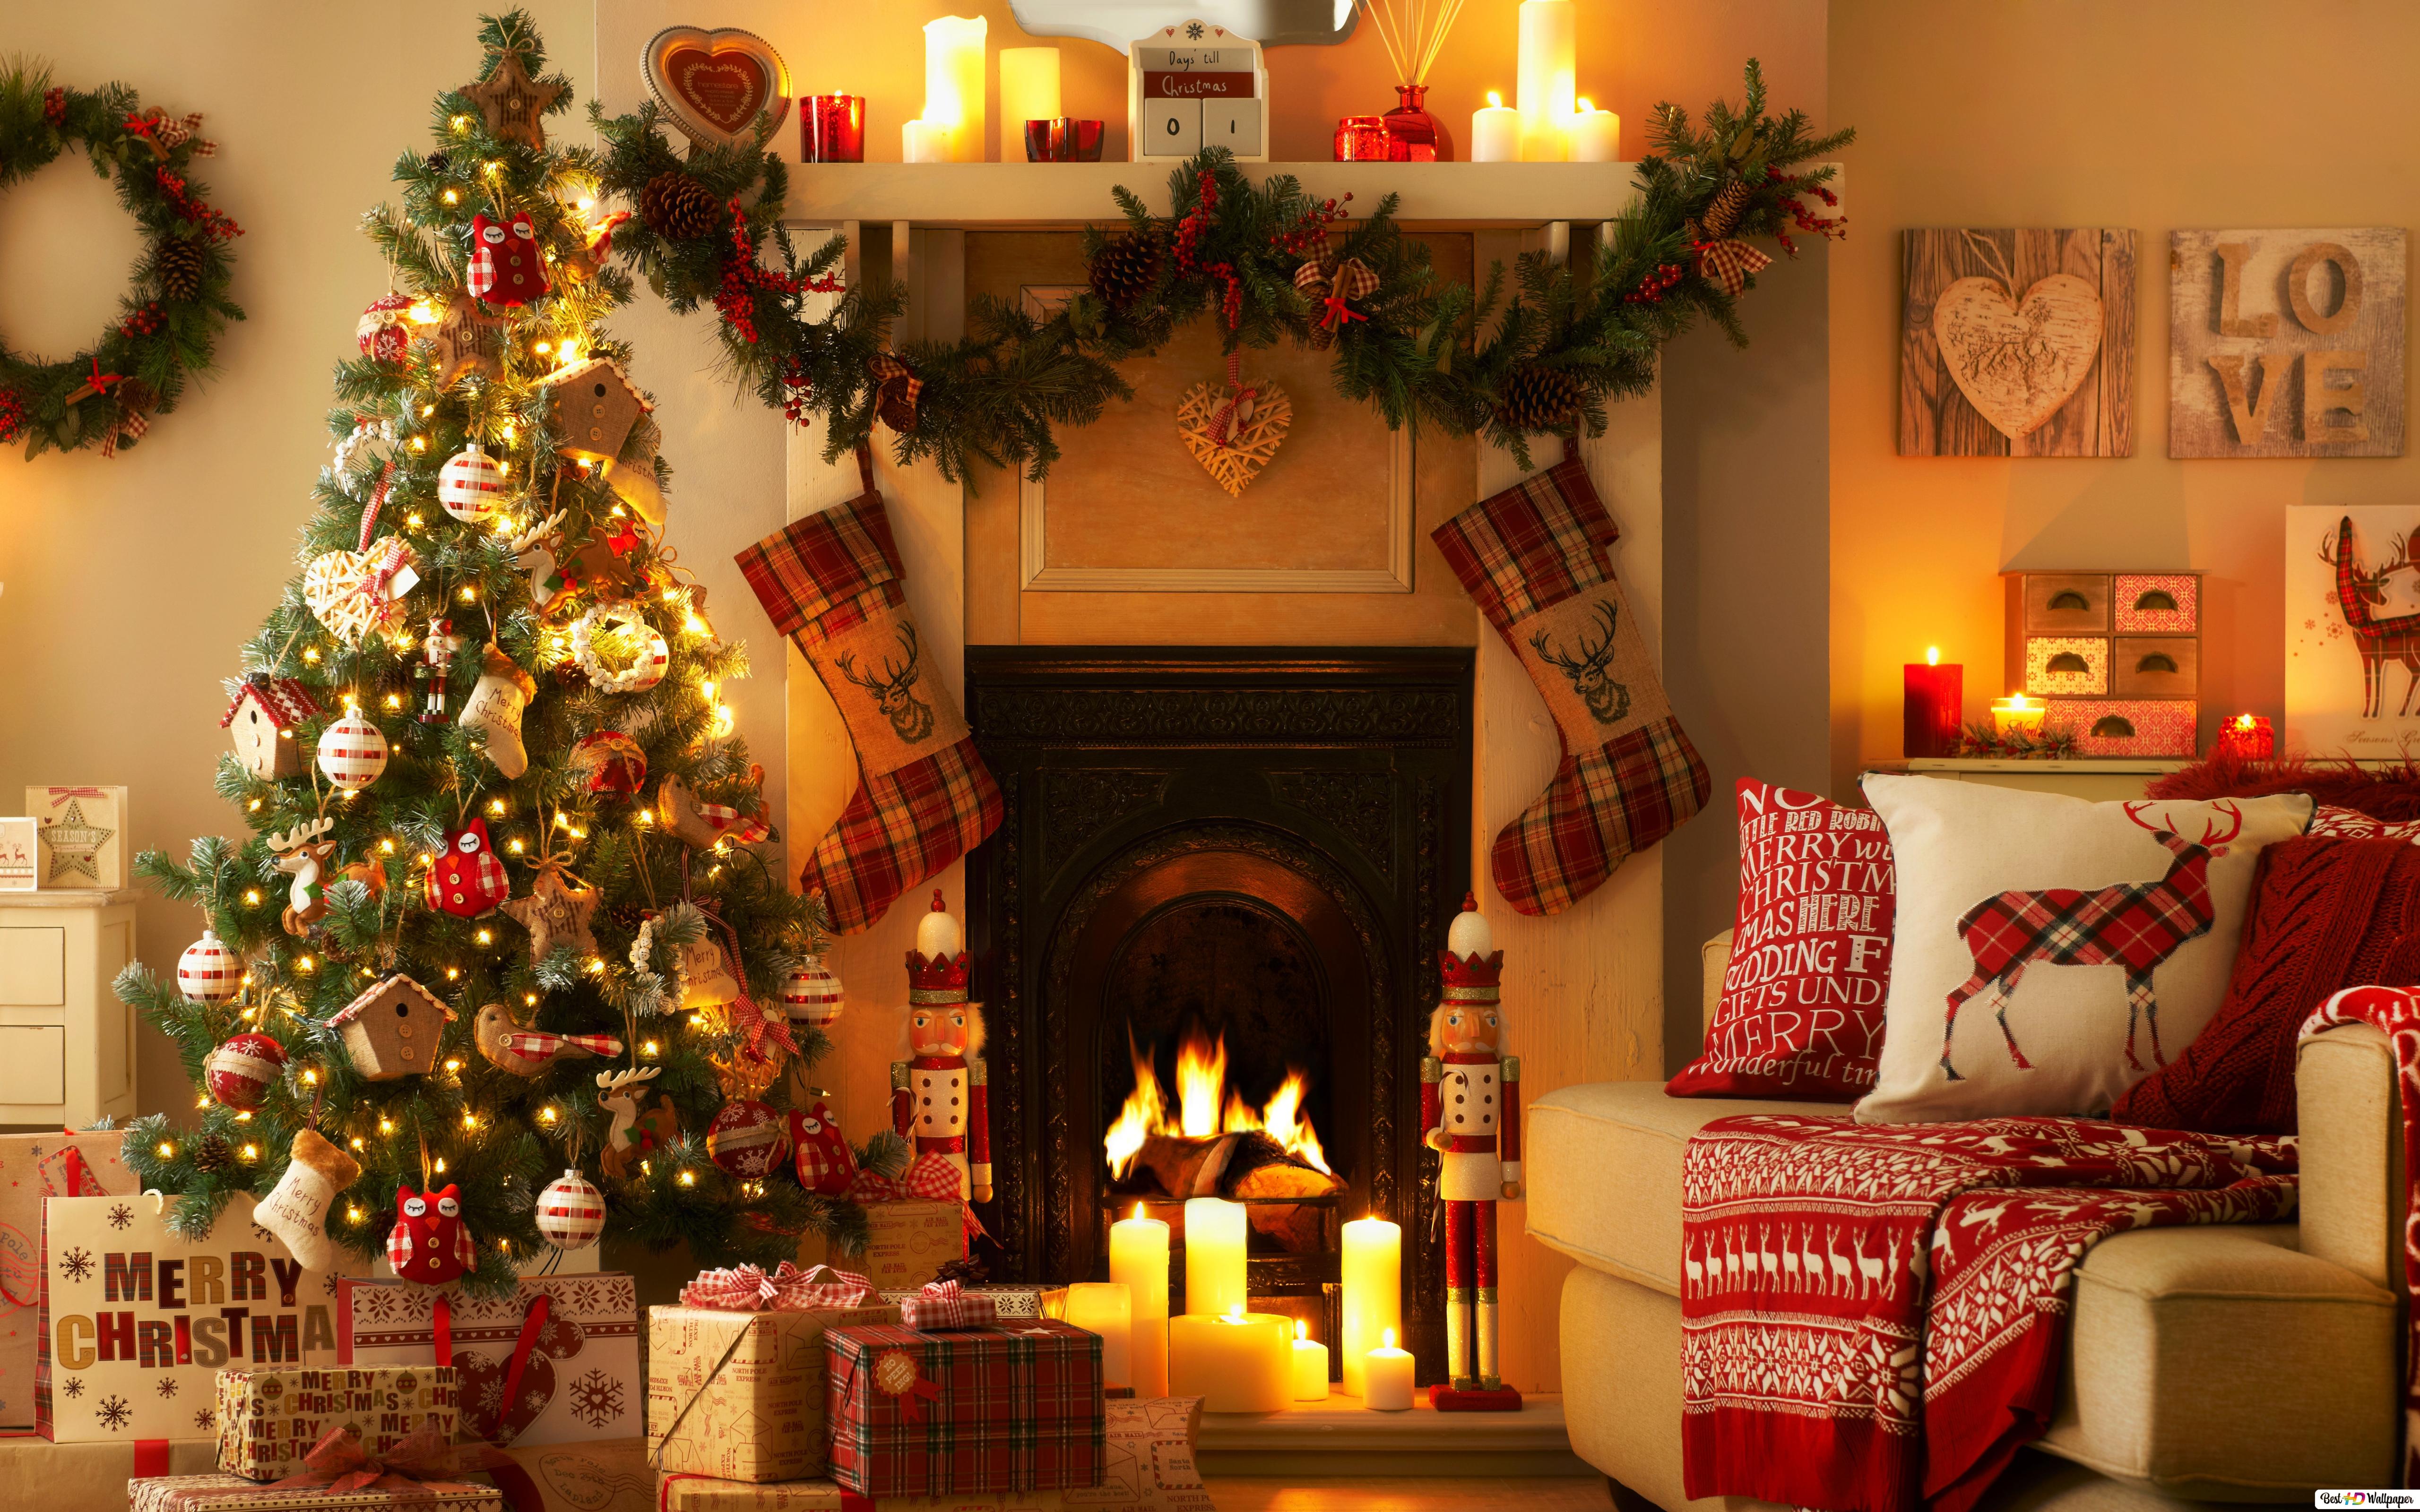 Christmas warm and cozy fireplace HD wallpaper download